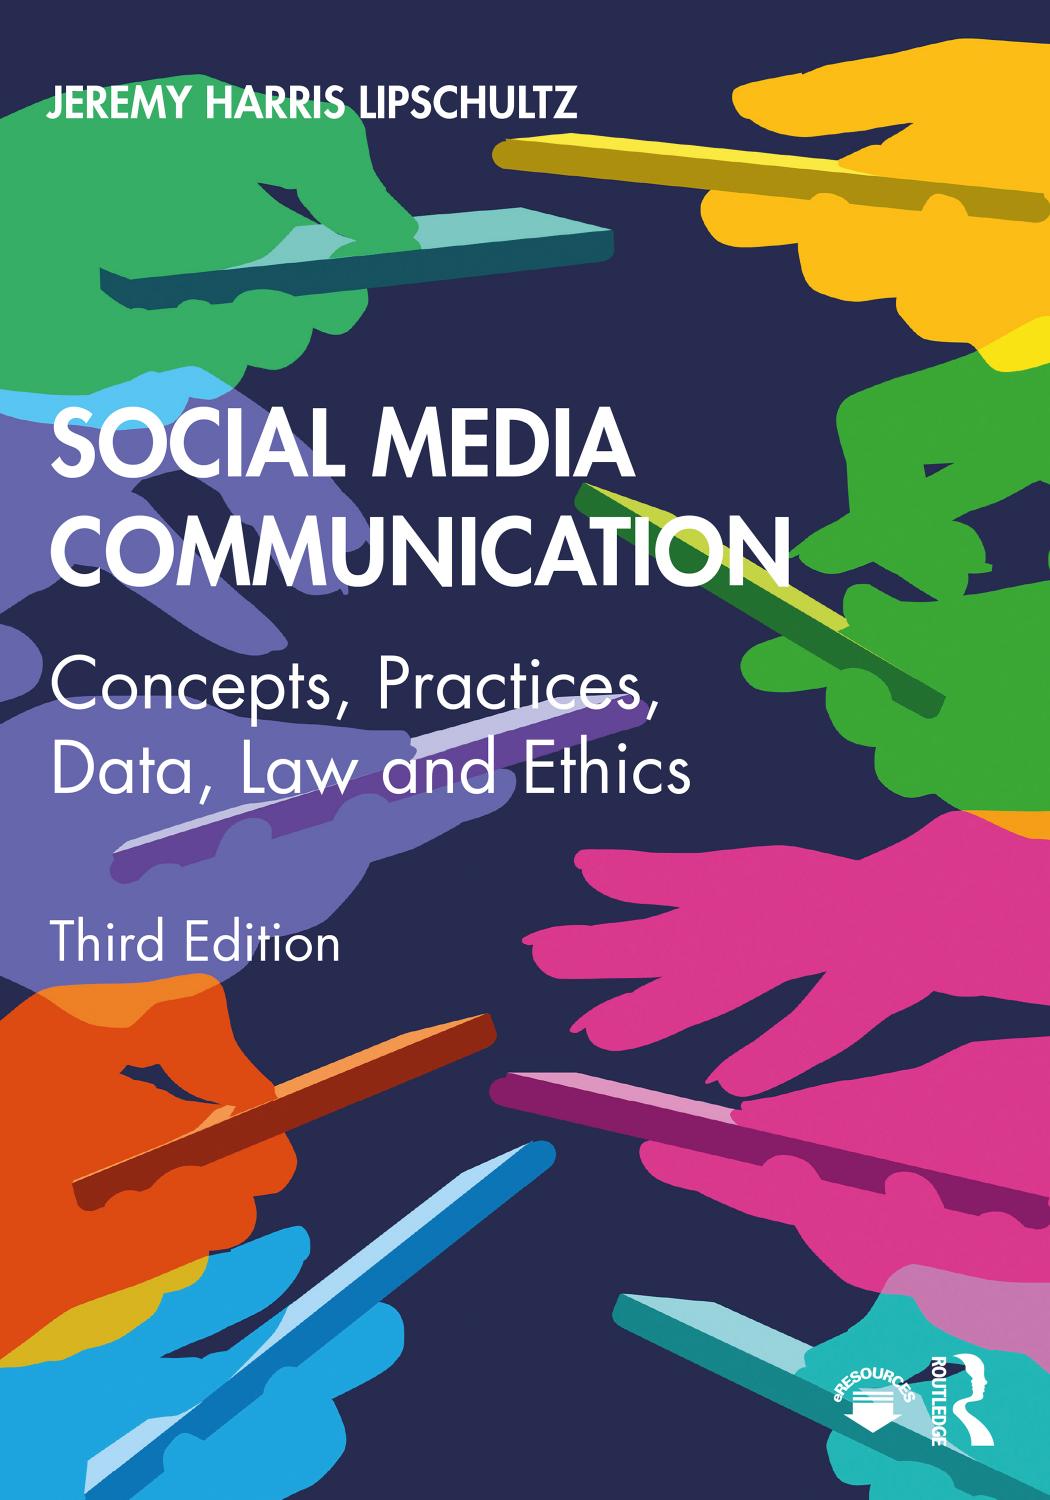 Social Media Communication: Concepts, Practices, Data, Law and Ethics Third Edition by Jeremy Harris Lipschultz